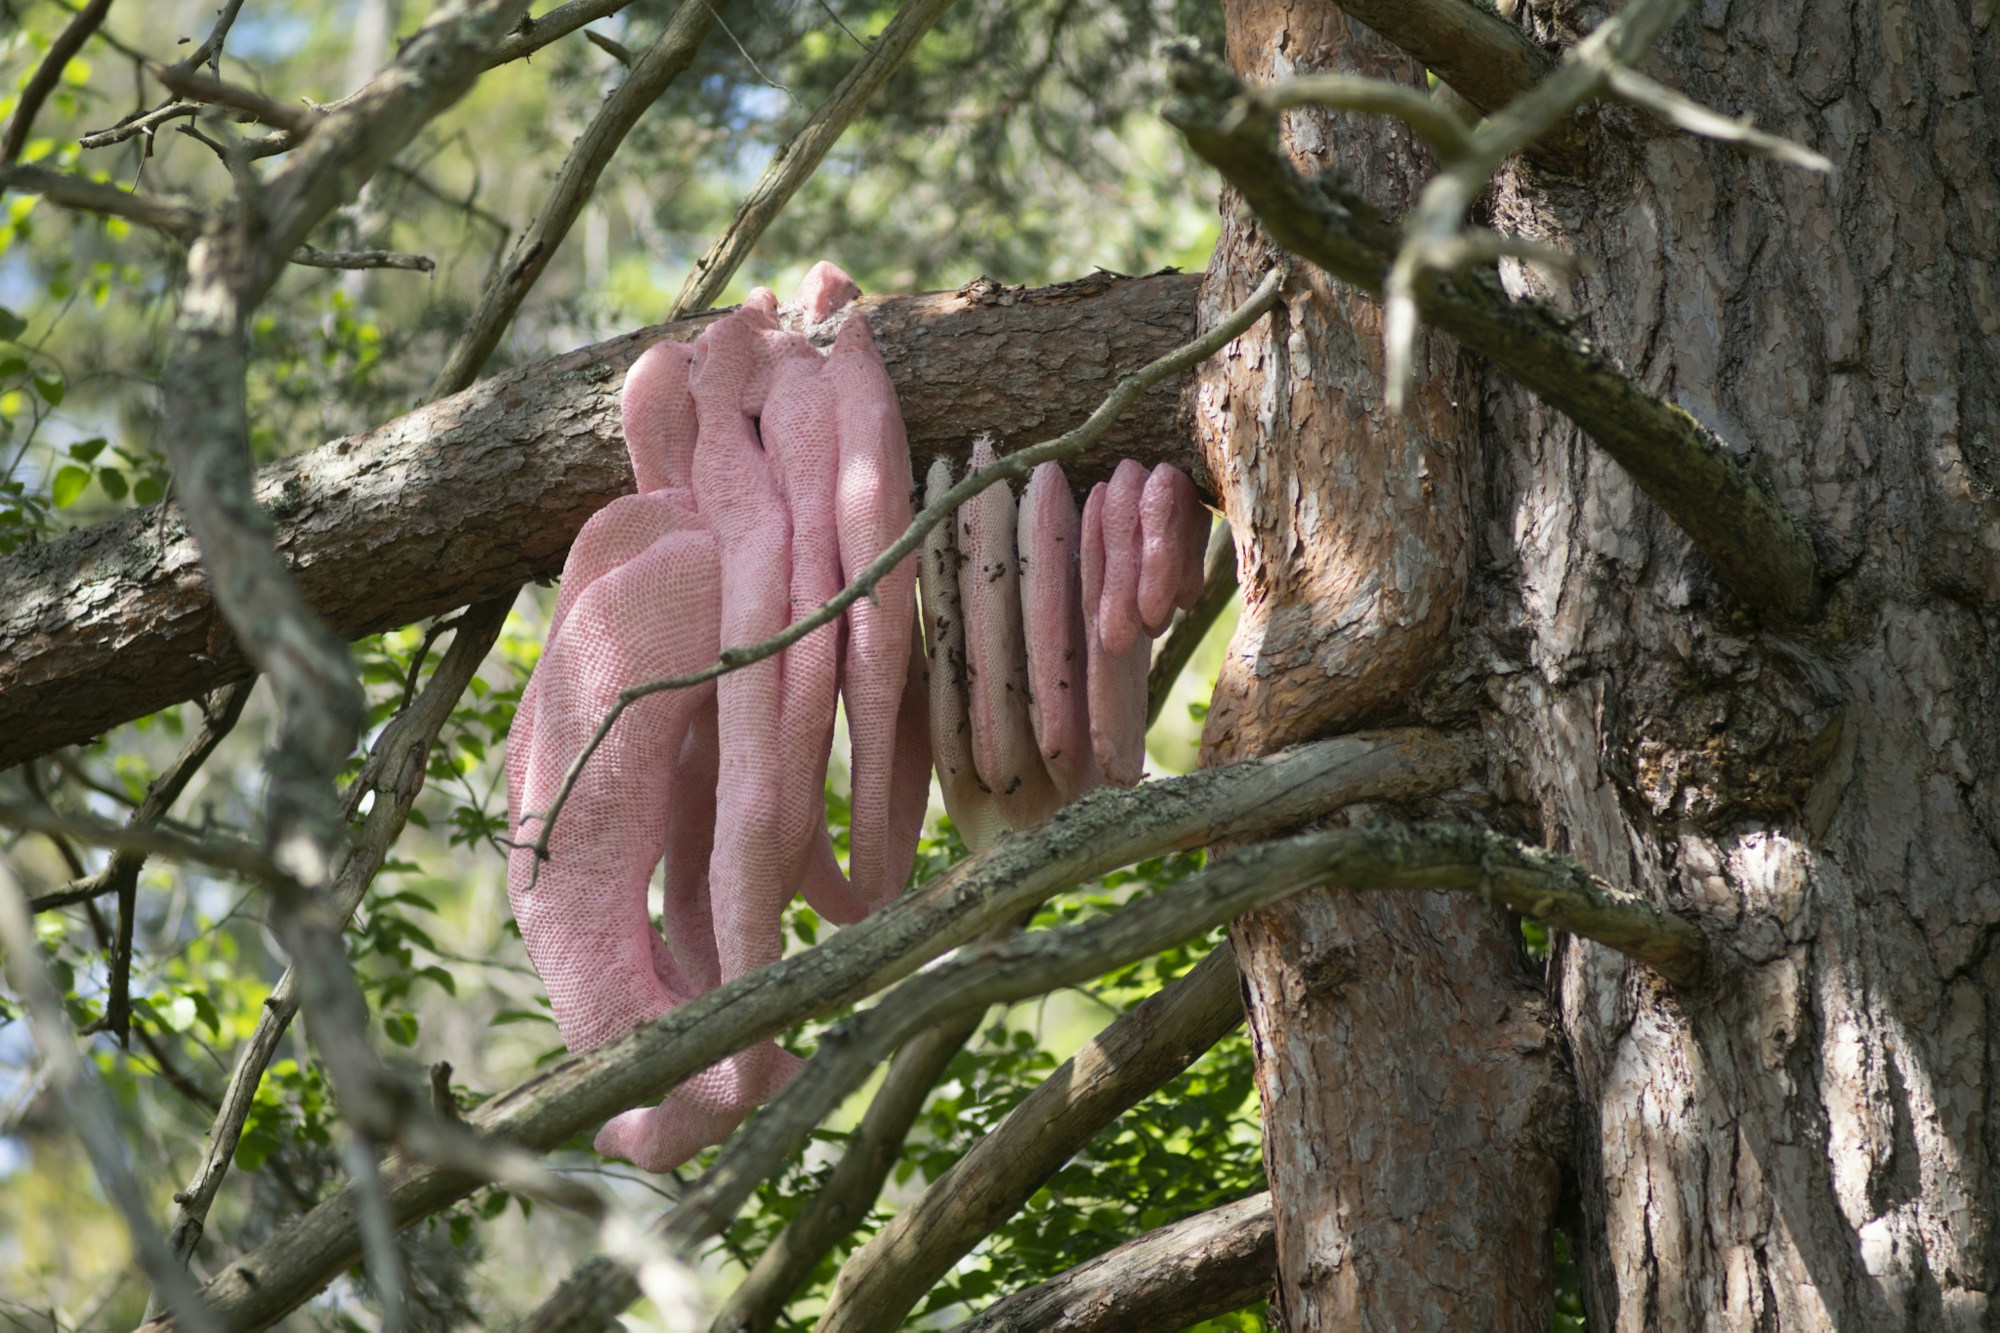 A pink beehive hanging from a tree in the wood. The beehive is a mutation made by artificial intelligence.